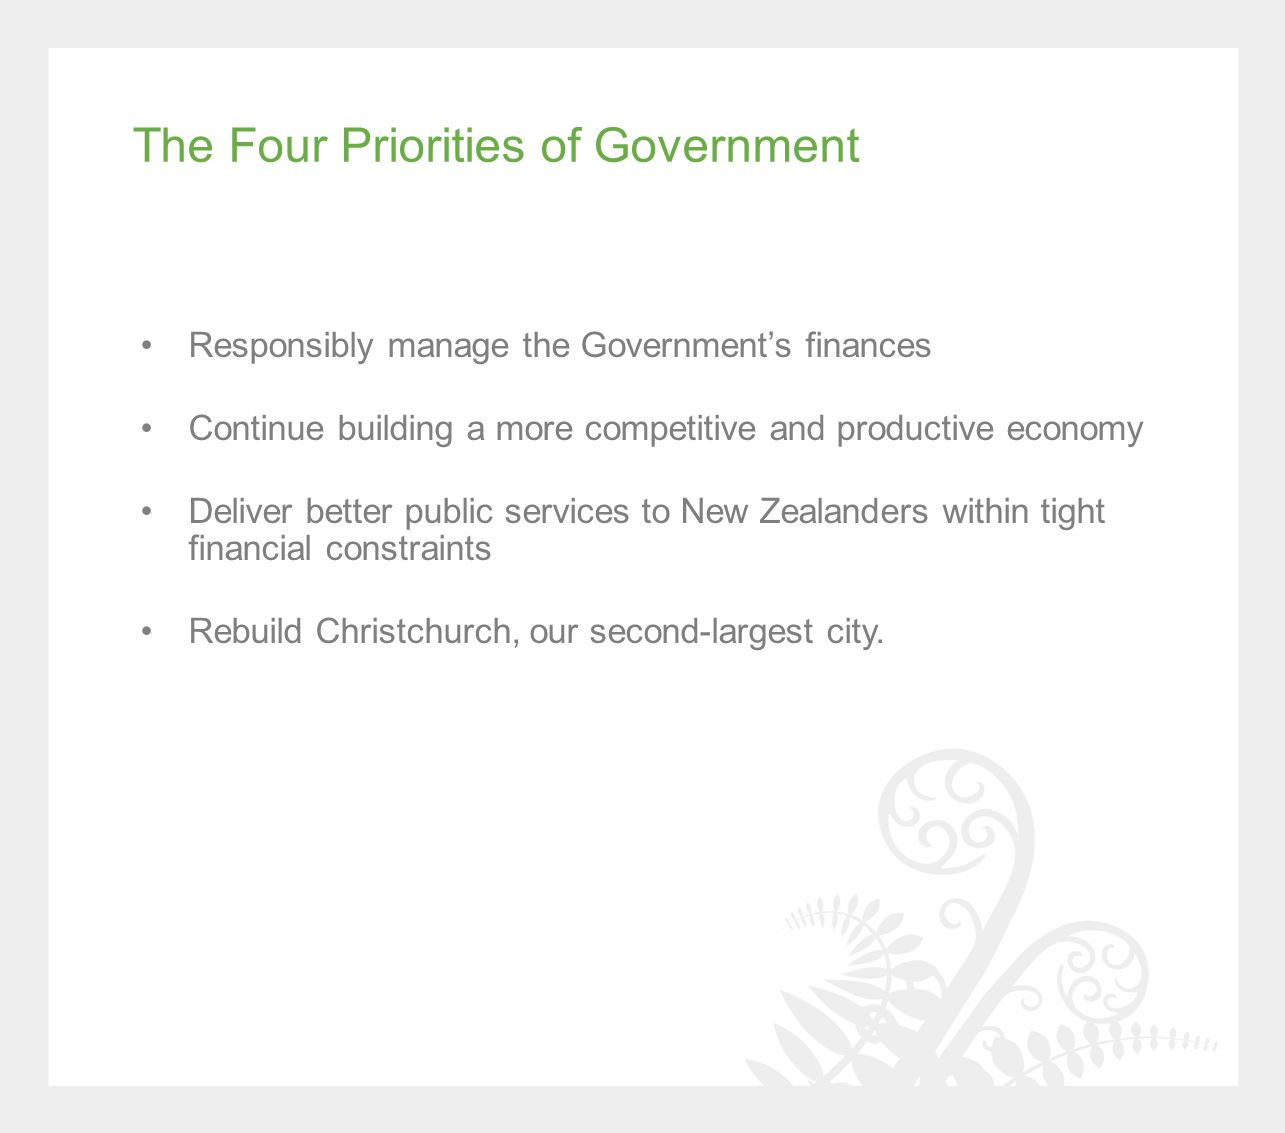 The Four Priorities of Government Responsibly manage the Government’s finances Continue building a more competitive and productive economy Deliver better public services to New Zealanders within tight financial constraints Rebuild Christchurch, our second-largest city.